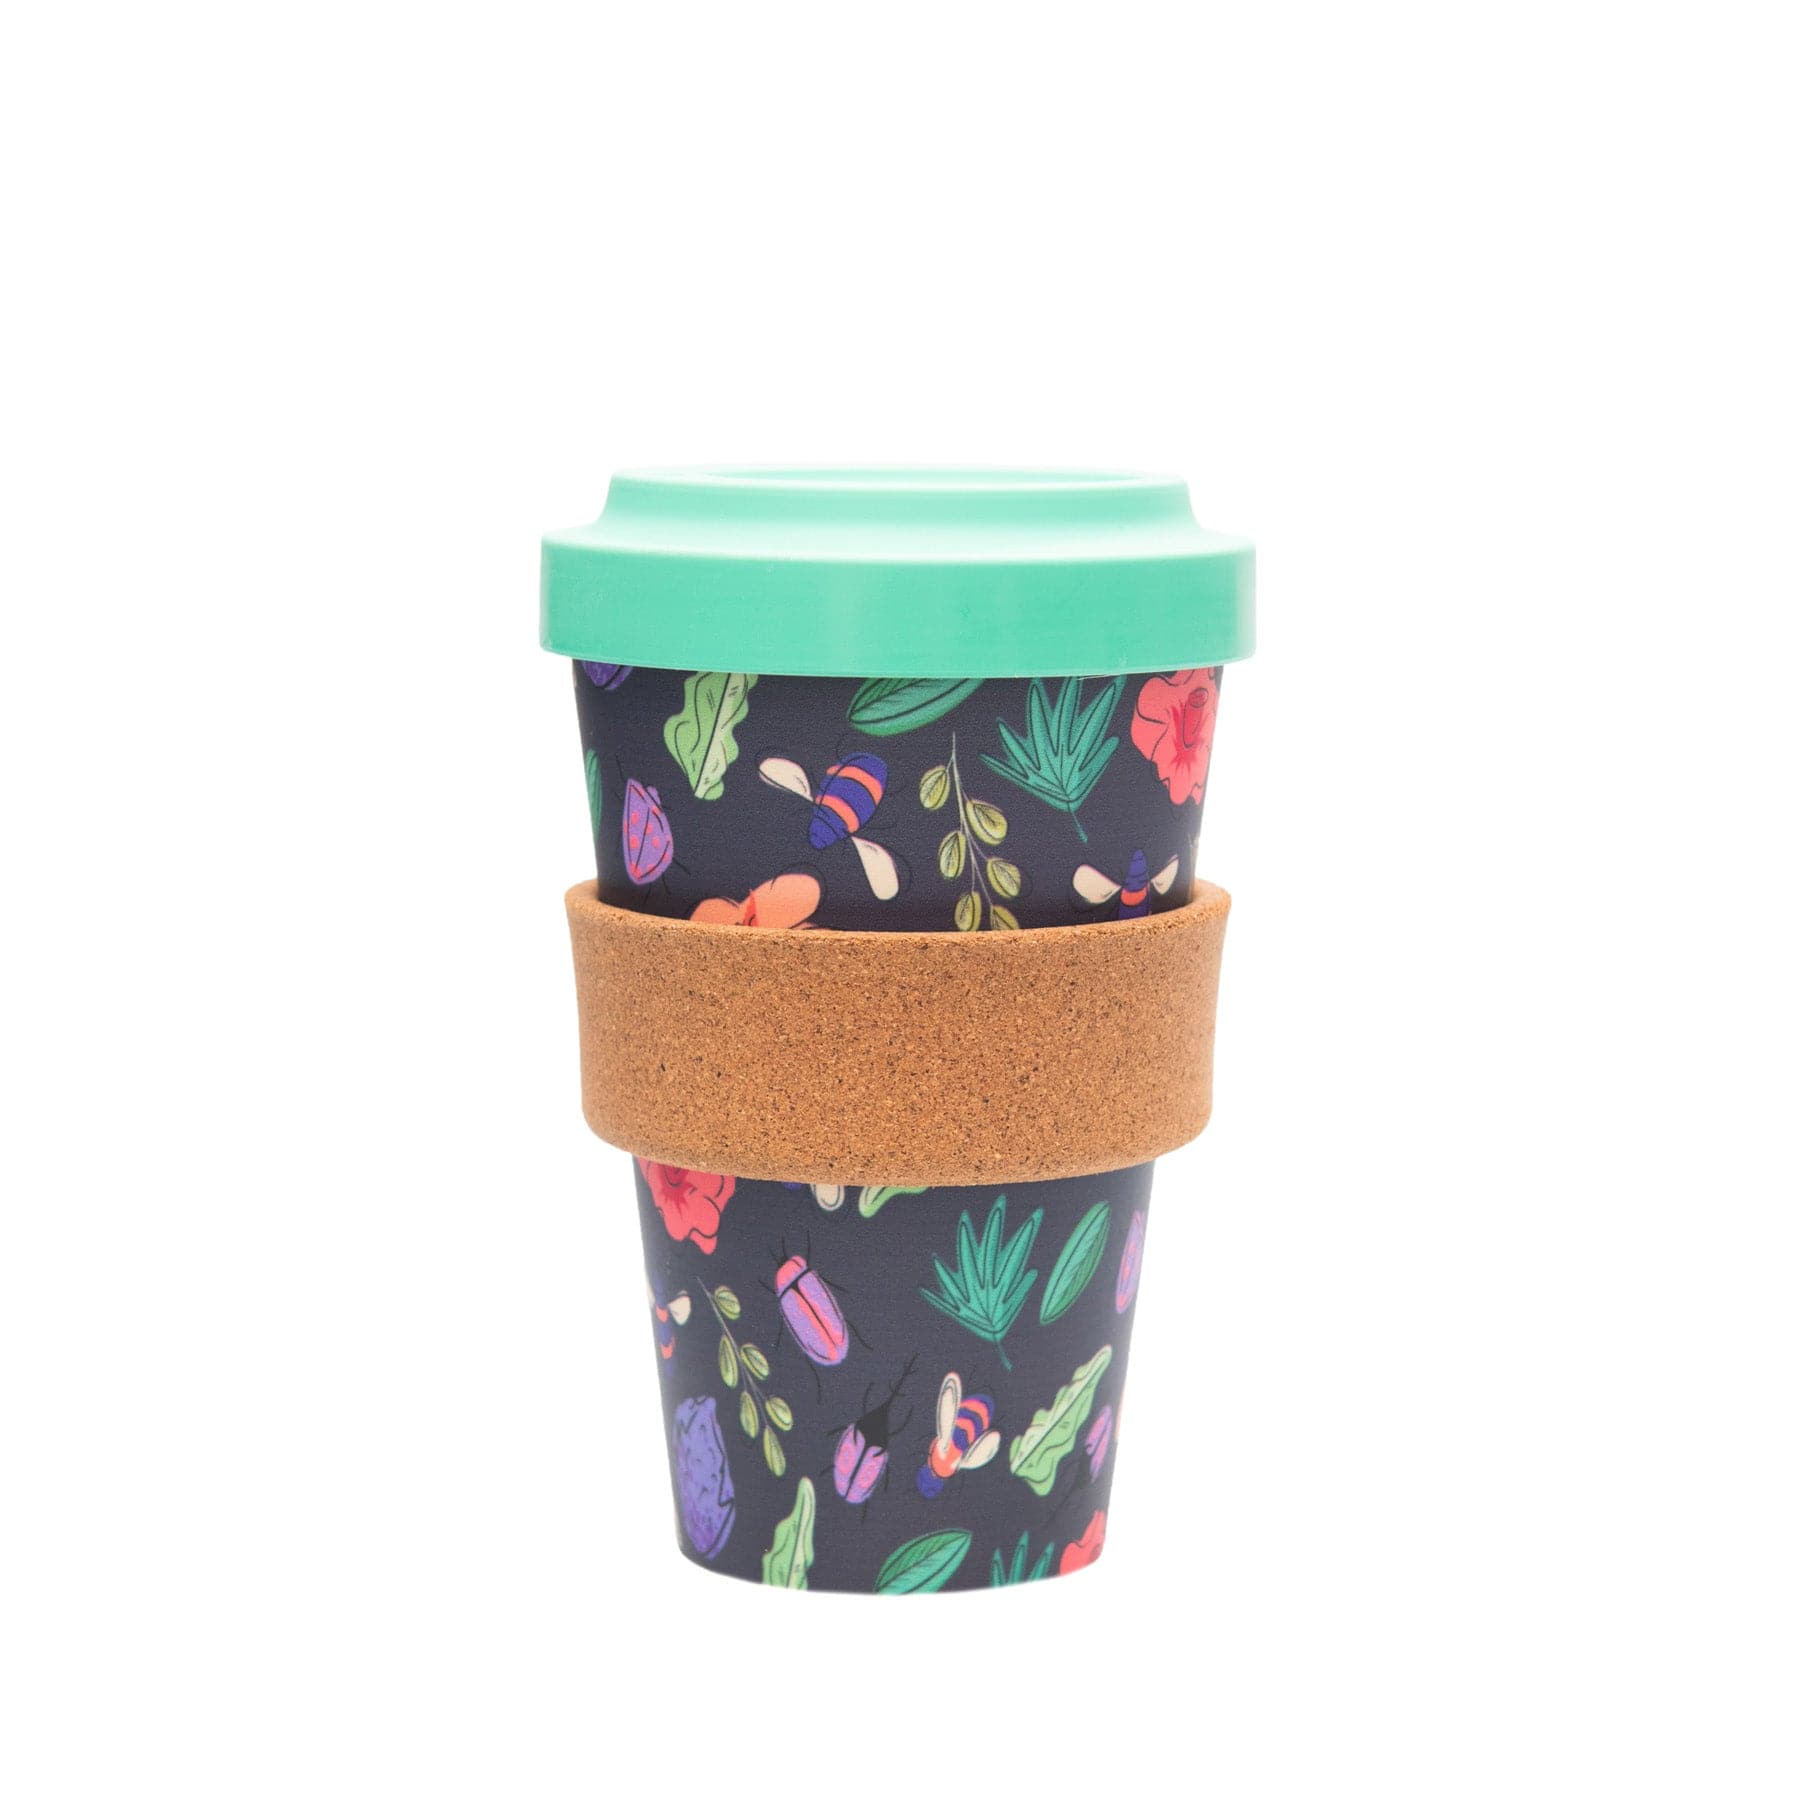 Reusable coffee cup with floral design and green lid, eco-friendly travel mug with cork band on white background